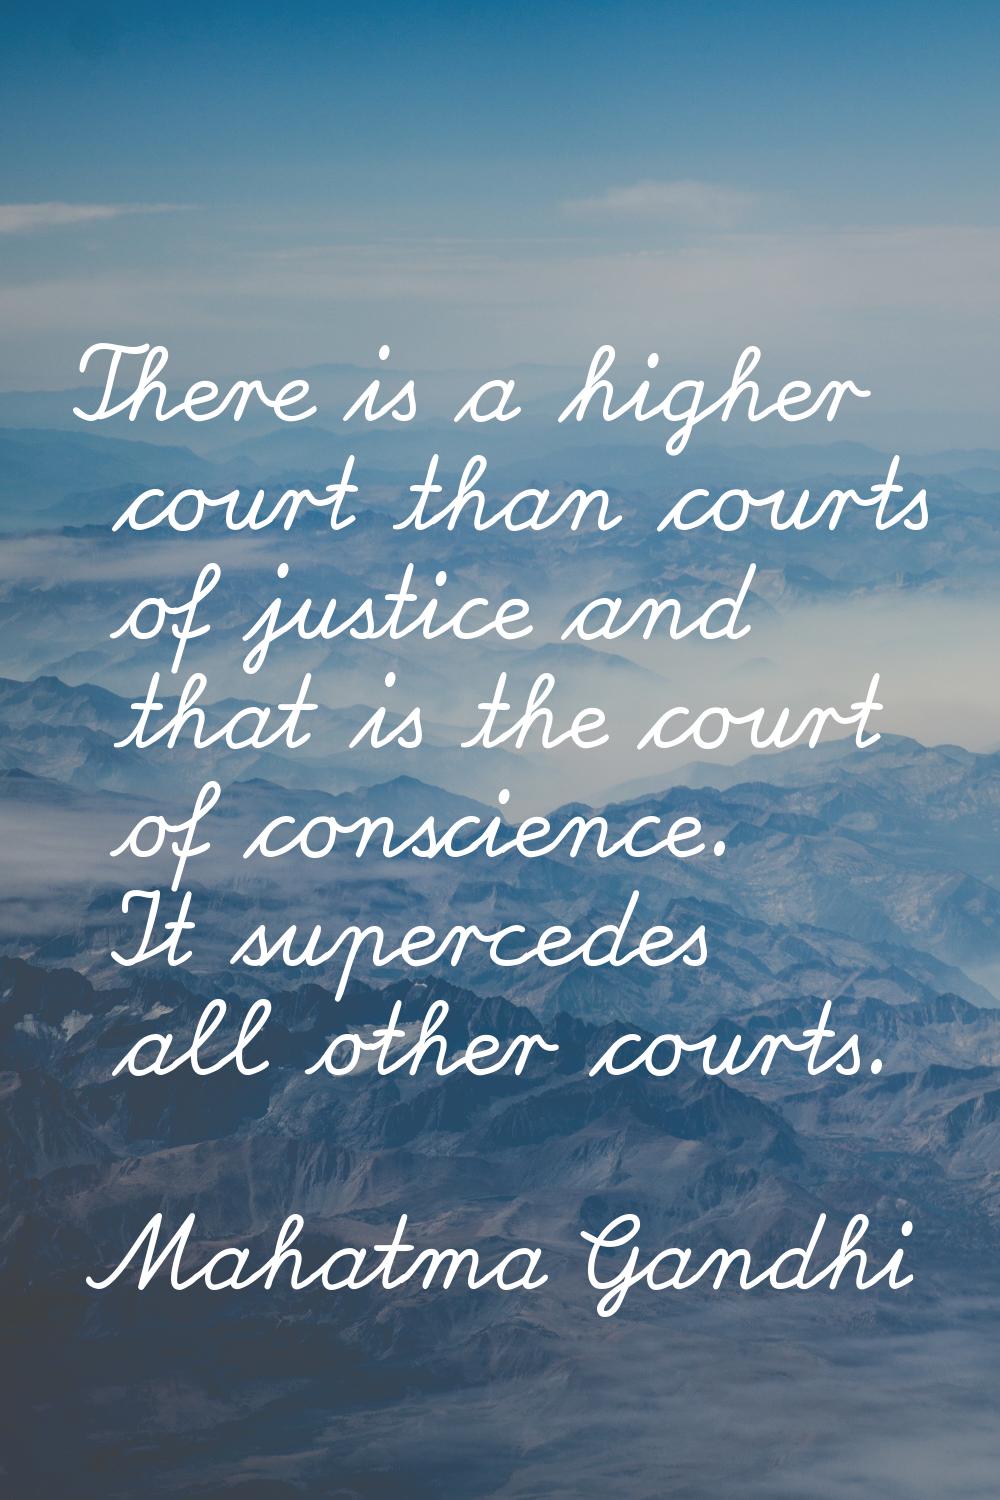 There is a higher court than courts of justice and that is the court of conscience. It supercedes a